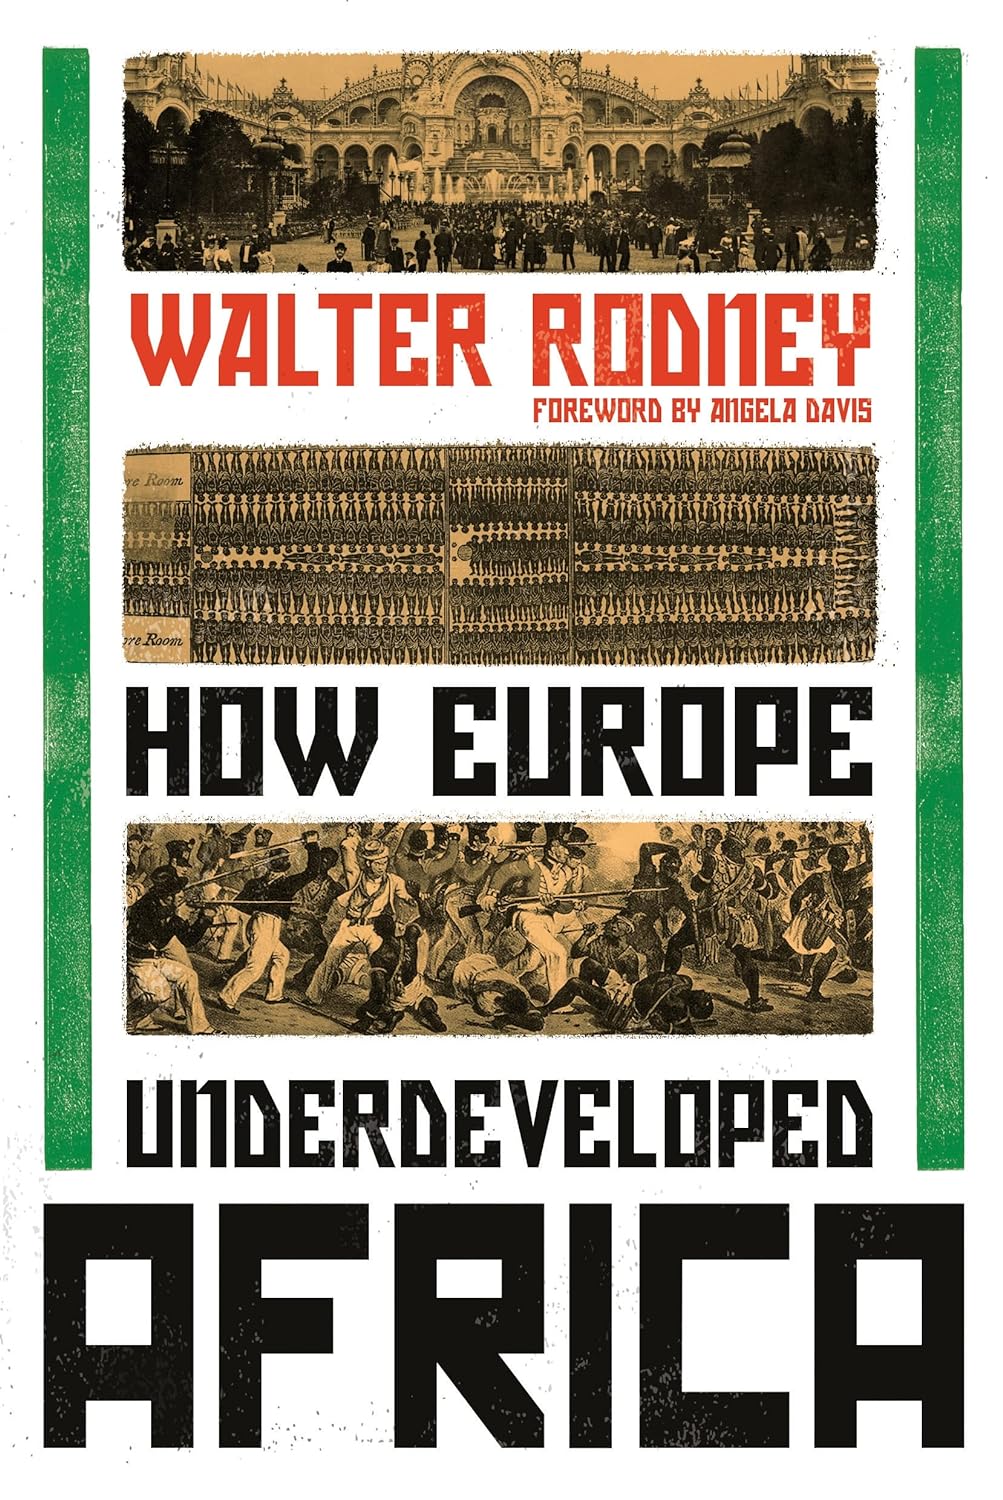 How Europe Underdeveloped Africa, by Walter Rodney